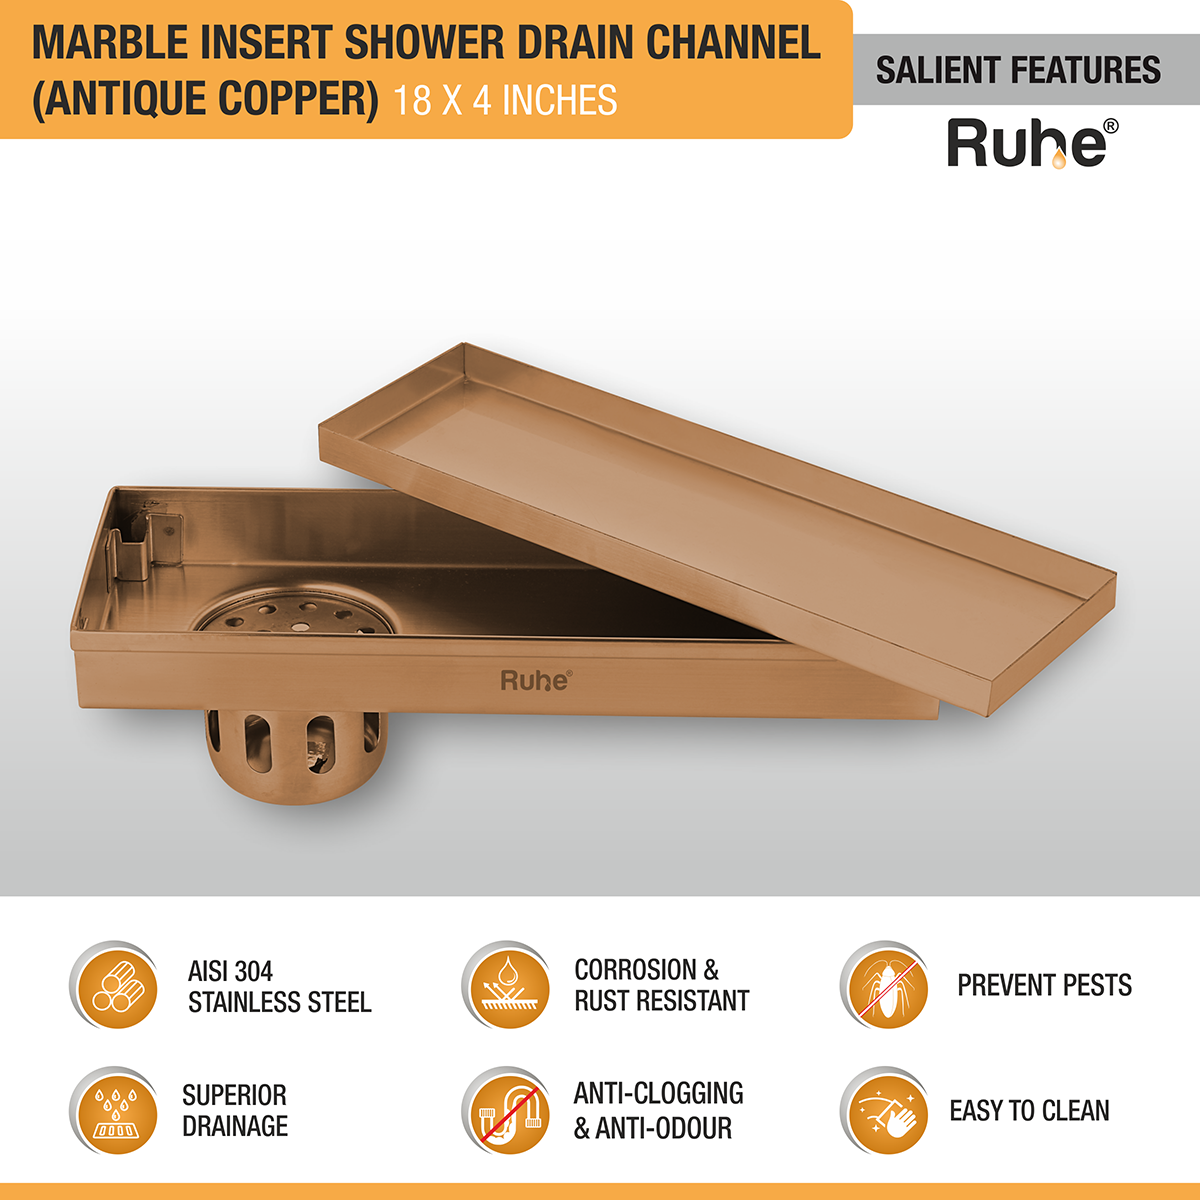 Marble Insert Shower Drain Channel (18 x 4 Inches) ROSE GOLD PVD Coated features and benefits